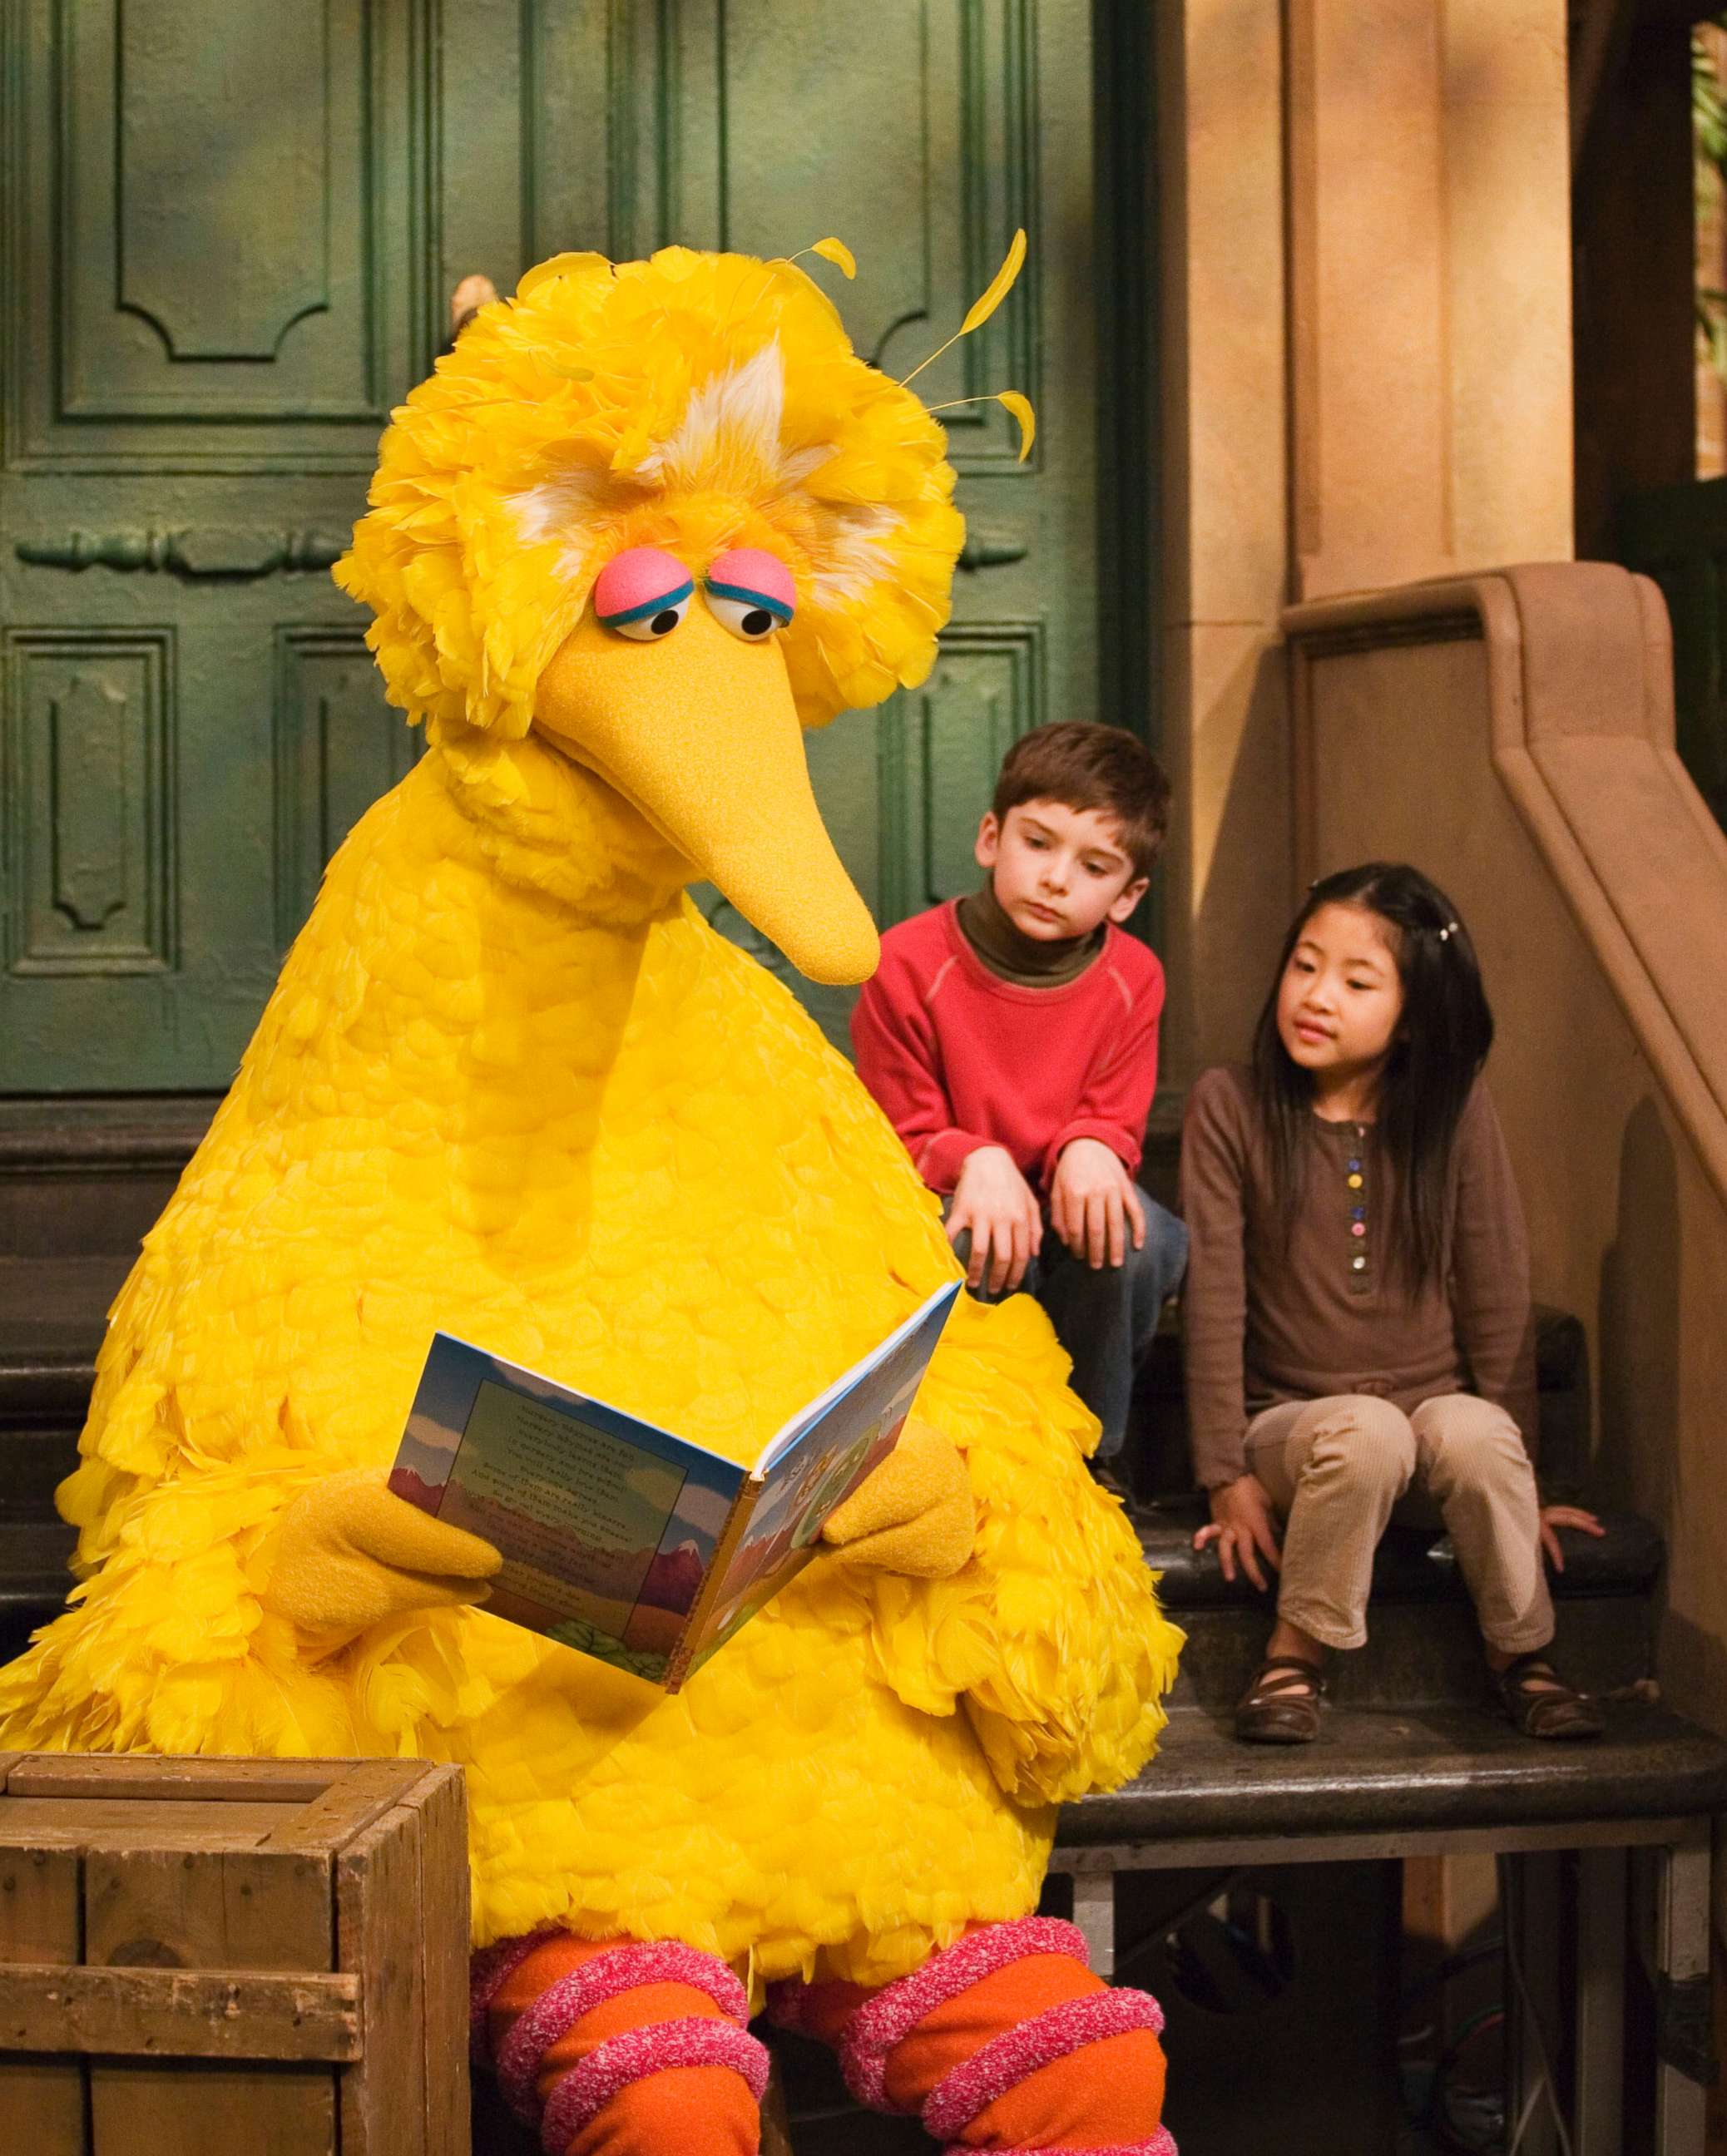 PHOTO: Big Bird reads to Connor Scott and Tiffany Jiao during a taping of Sesame Street in New York, April 10, 2008. Caroll Spinney, the puppeteer who has played Big Bird on "Sesame Street" is retiring after nearly 50 years on the show. 